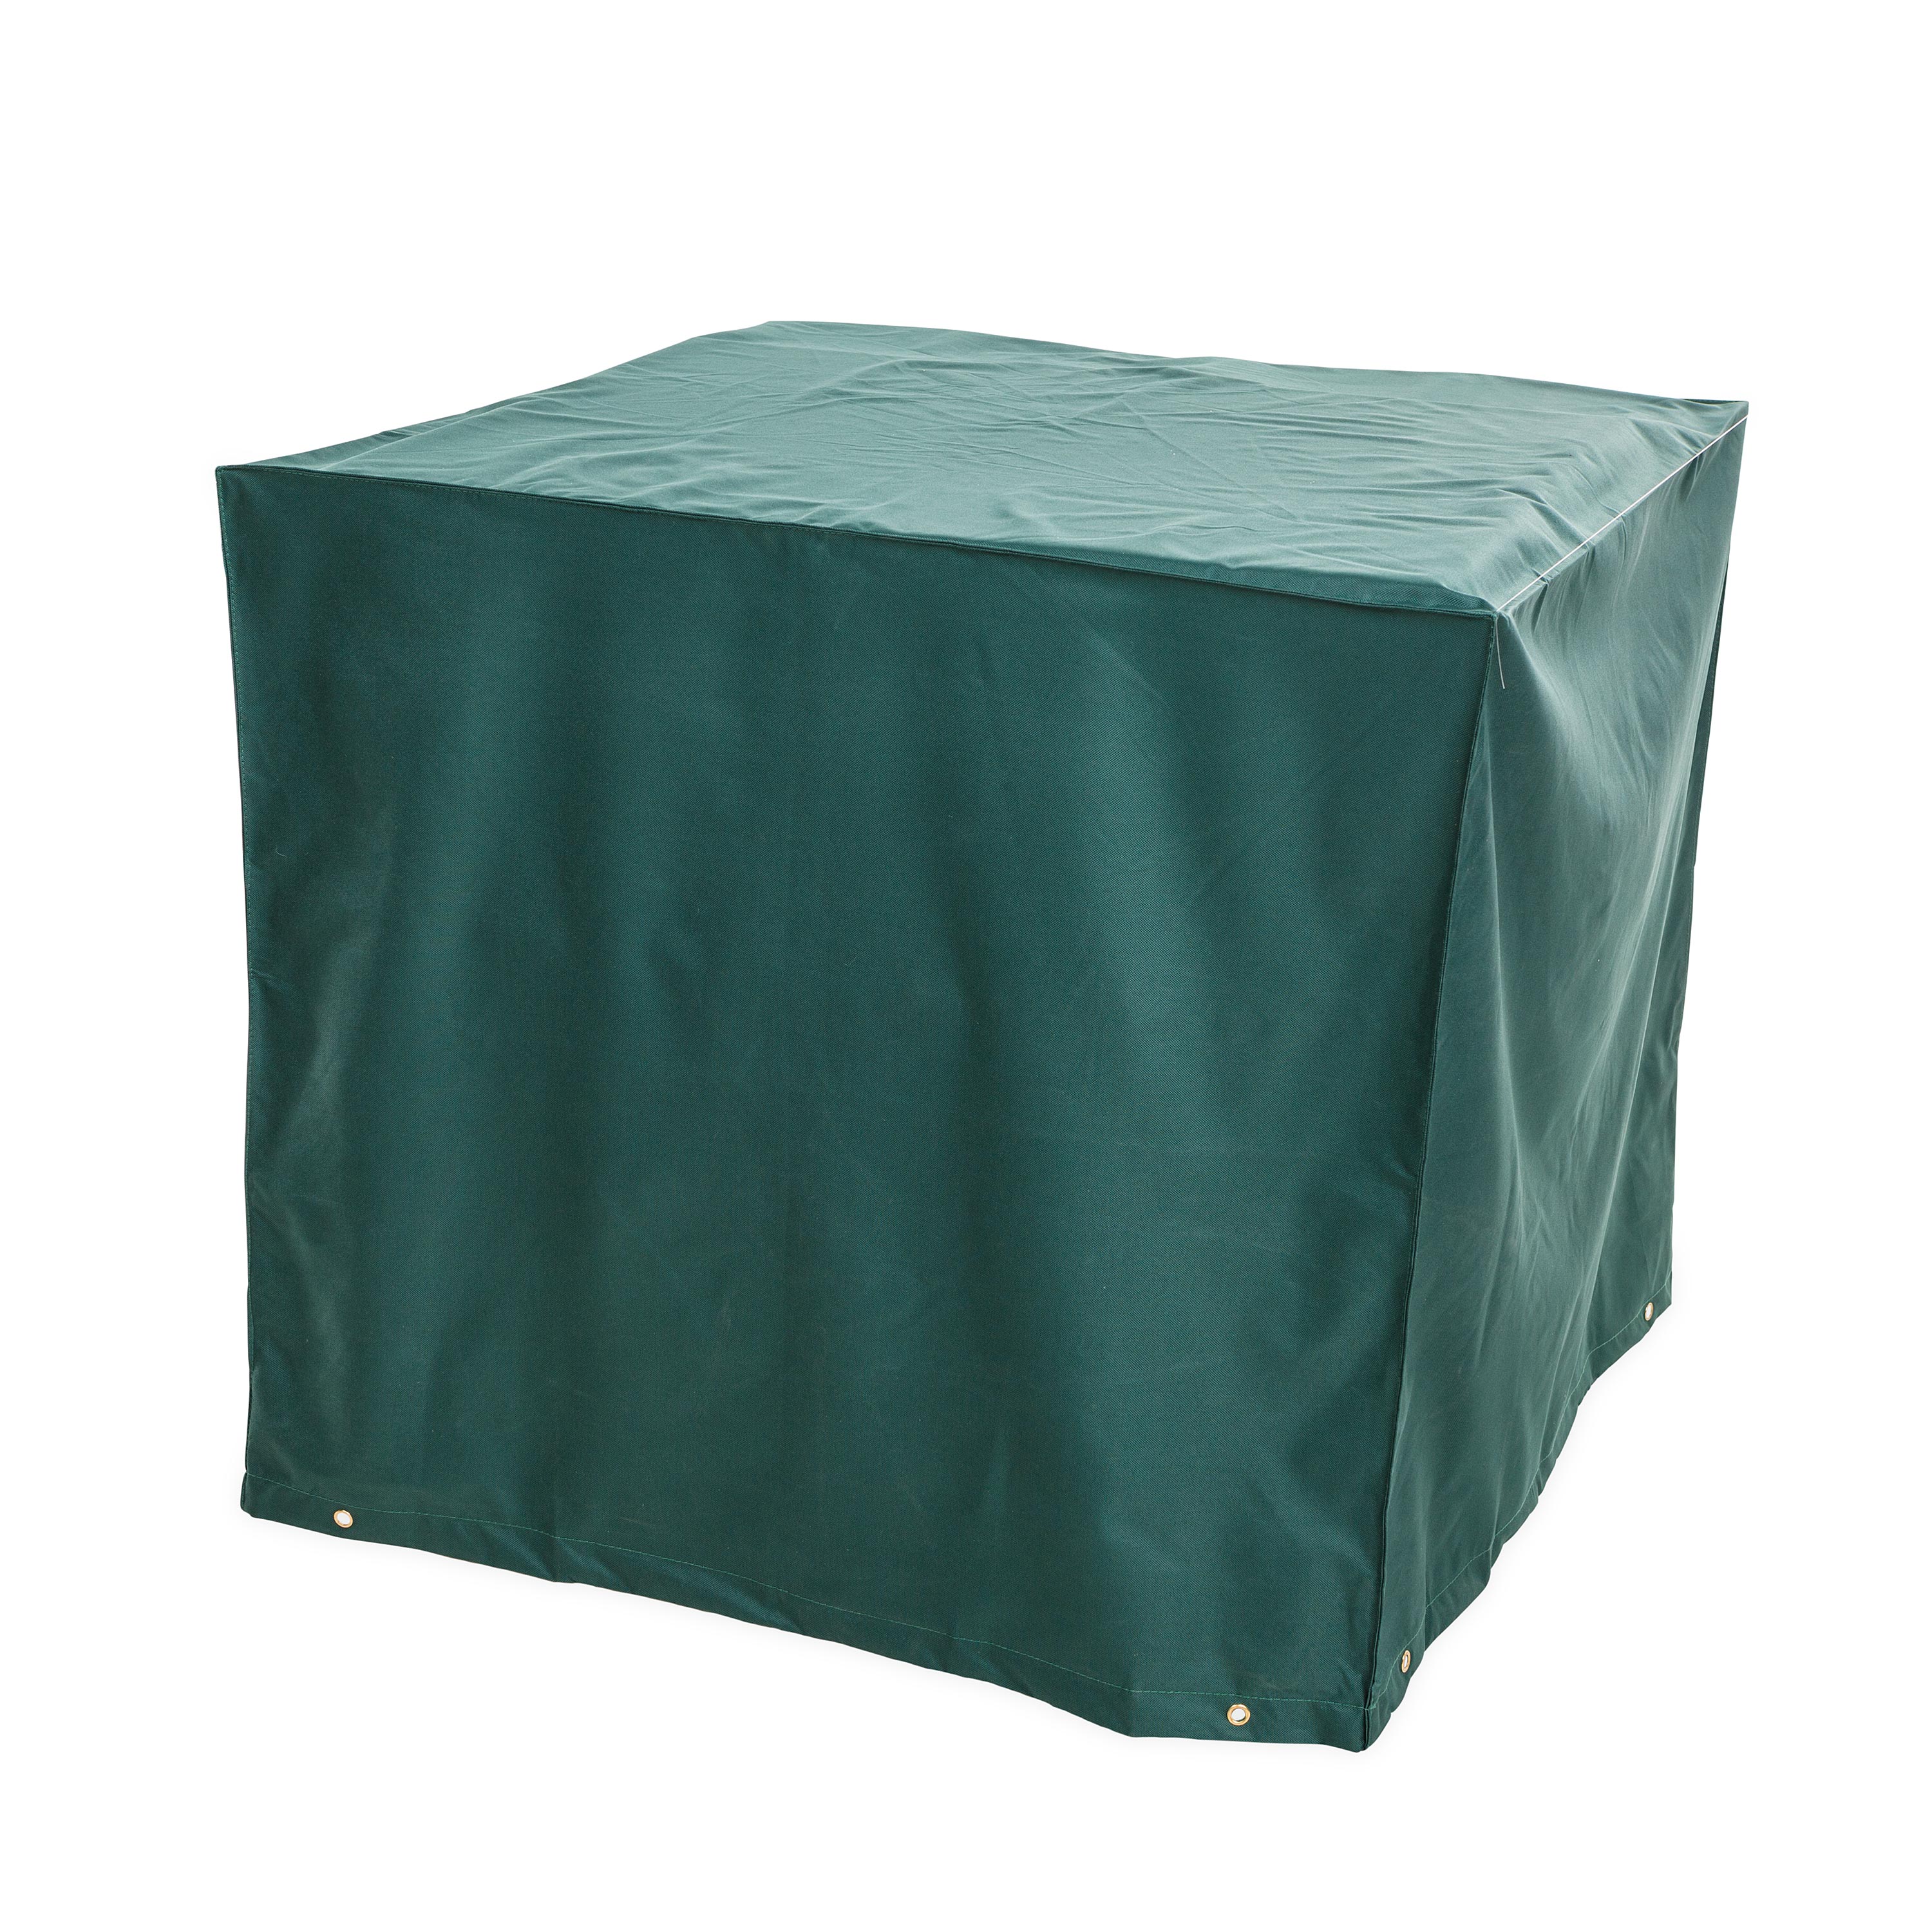 Classic Outdoor Furniture All-Weather Cover for Square Air Conditioner